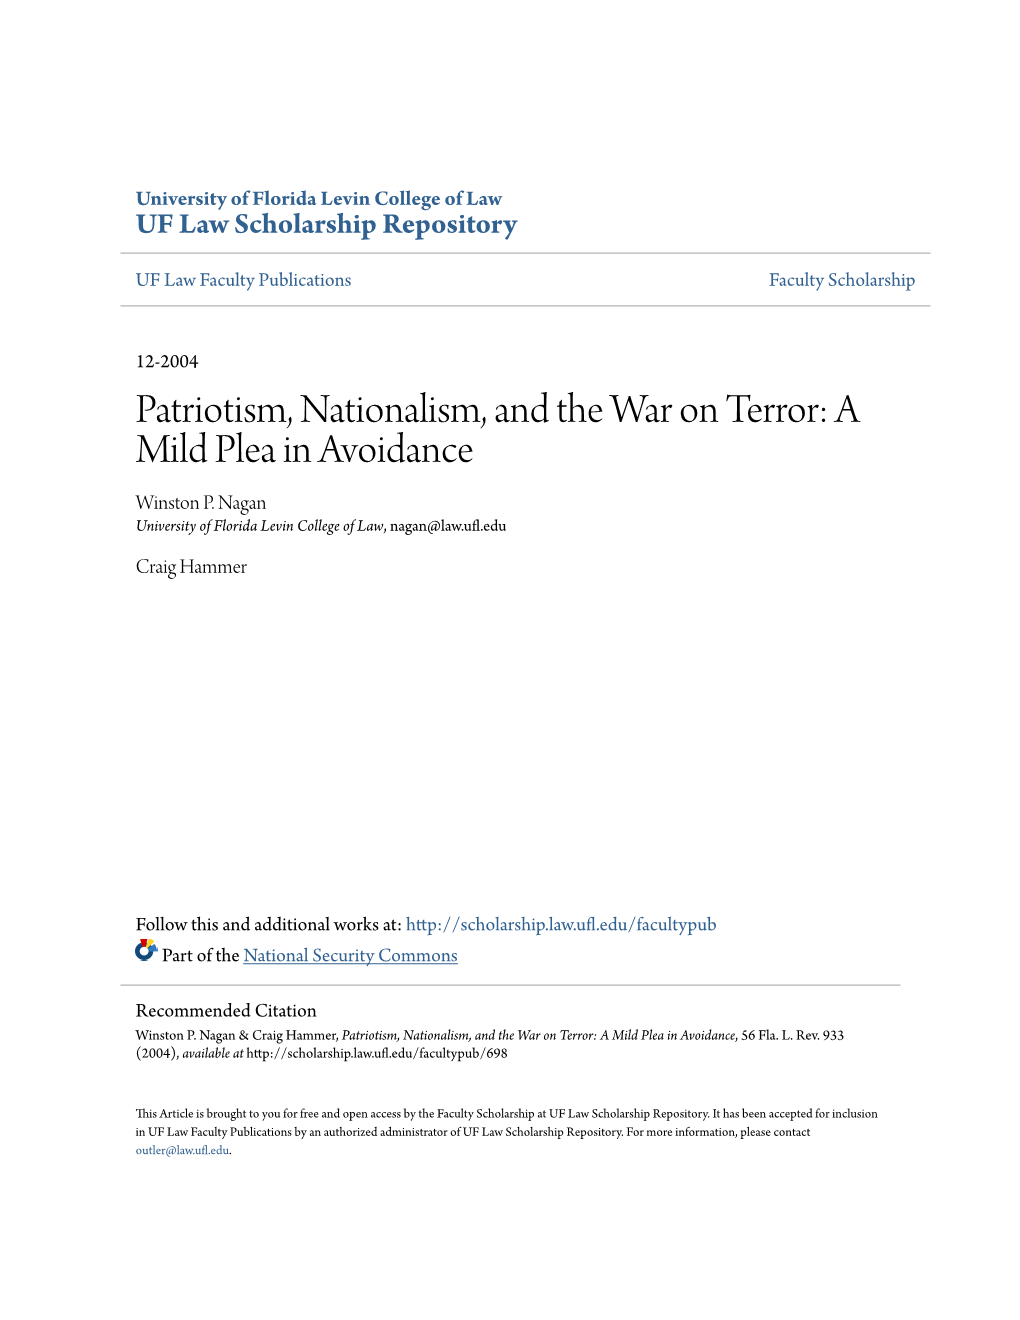 Patriotism, Nationalism, and the War on Terror: a Mild Plea in Avoidance Winston P